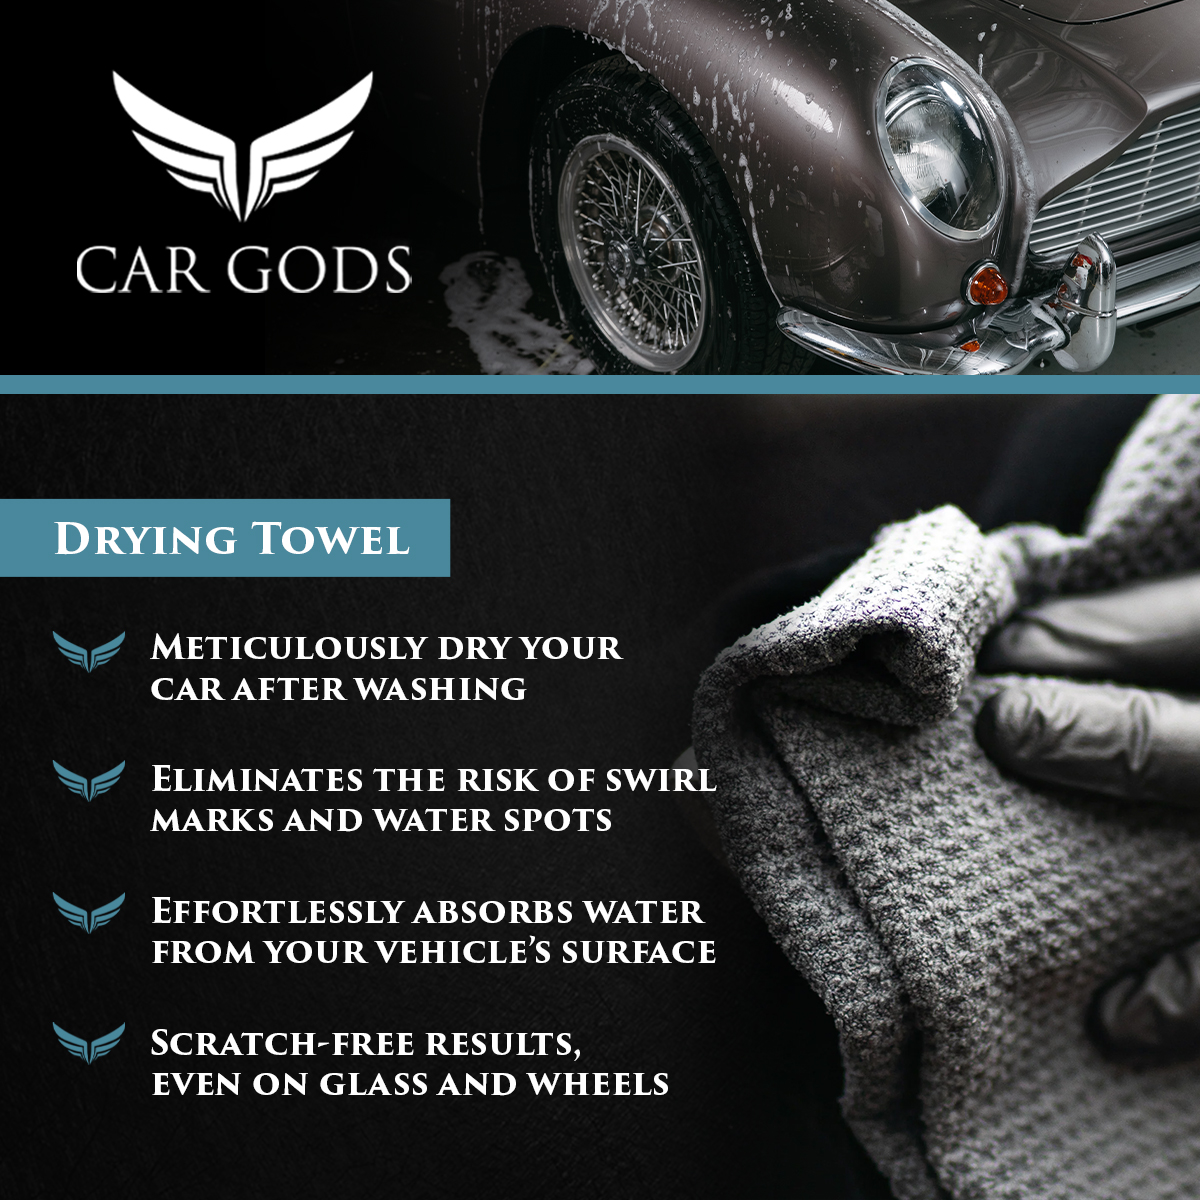 Car Gods Drying Towel Designed to dry your vehicle gently and thoroughly after washing, Car Gods Drying Towels are crafted from premium quality 400gsm microfibres. The waffle-structure of the drying towels locks-in moisture, drawing water away from your vehicle’s surface.